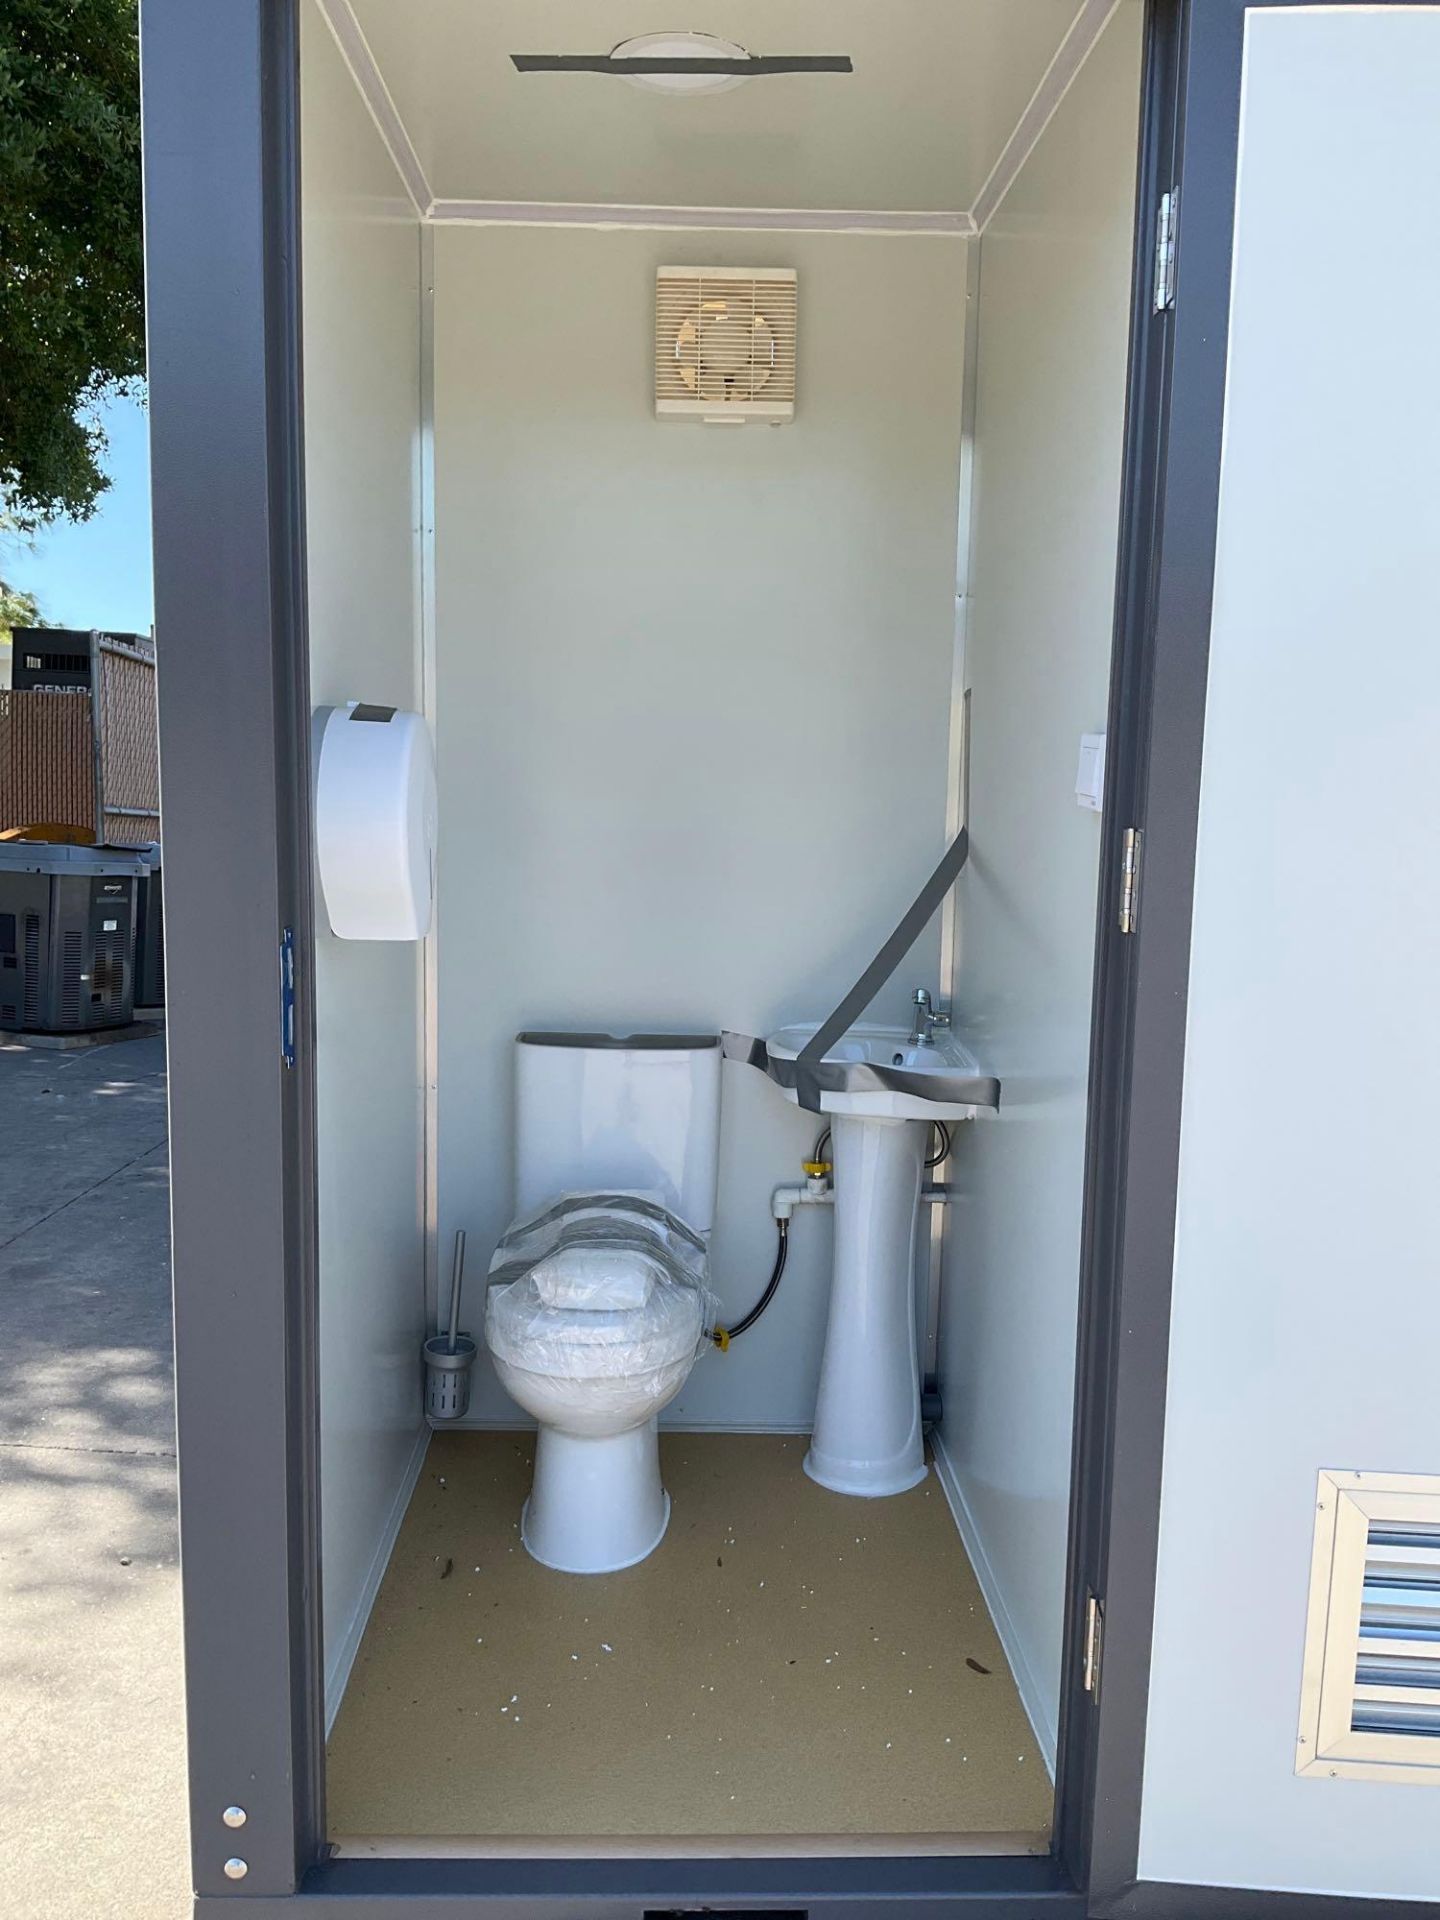 UNUSED PORTABLE DOUBLE BATHROOM UNIT, 2 STALLS, ELECTRIC & PLUMBING HOOK UP WITH EXTERIOR PLUMBING C - Image 12 of 12